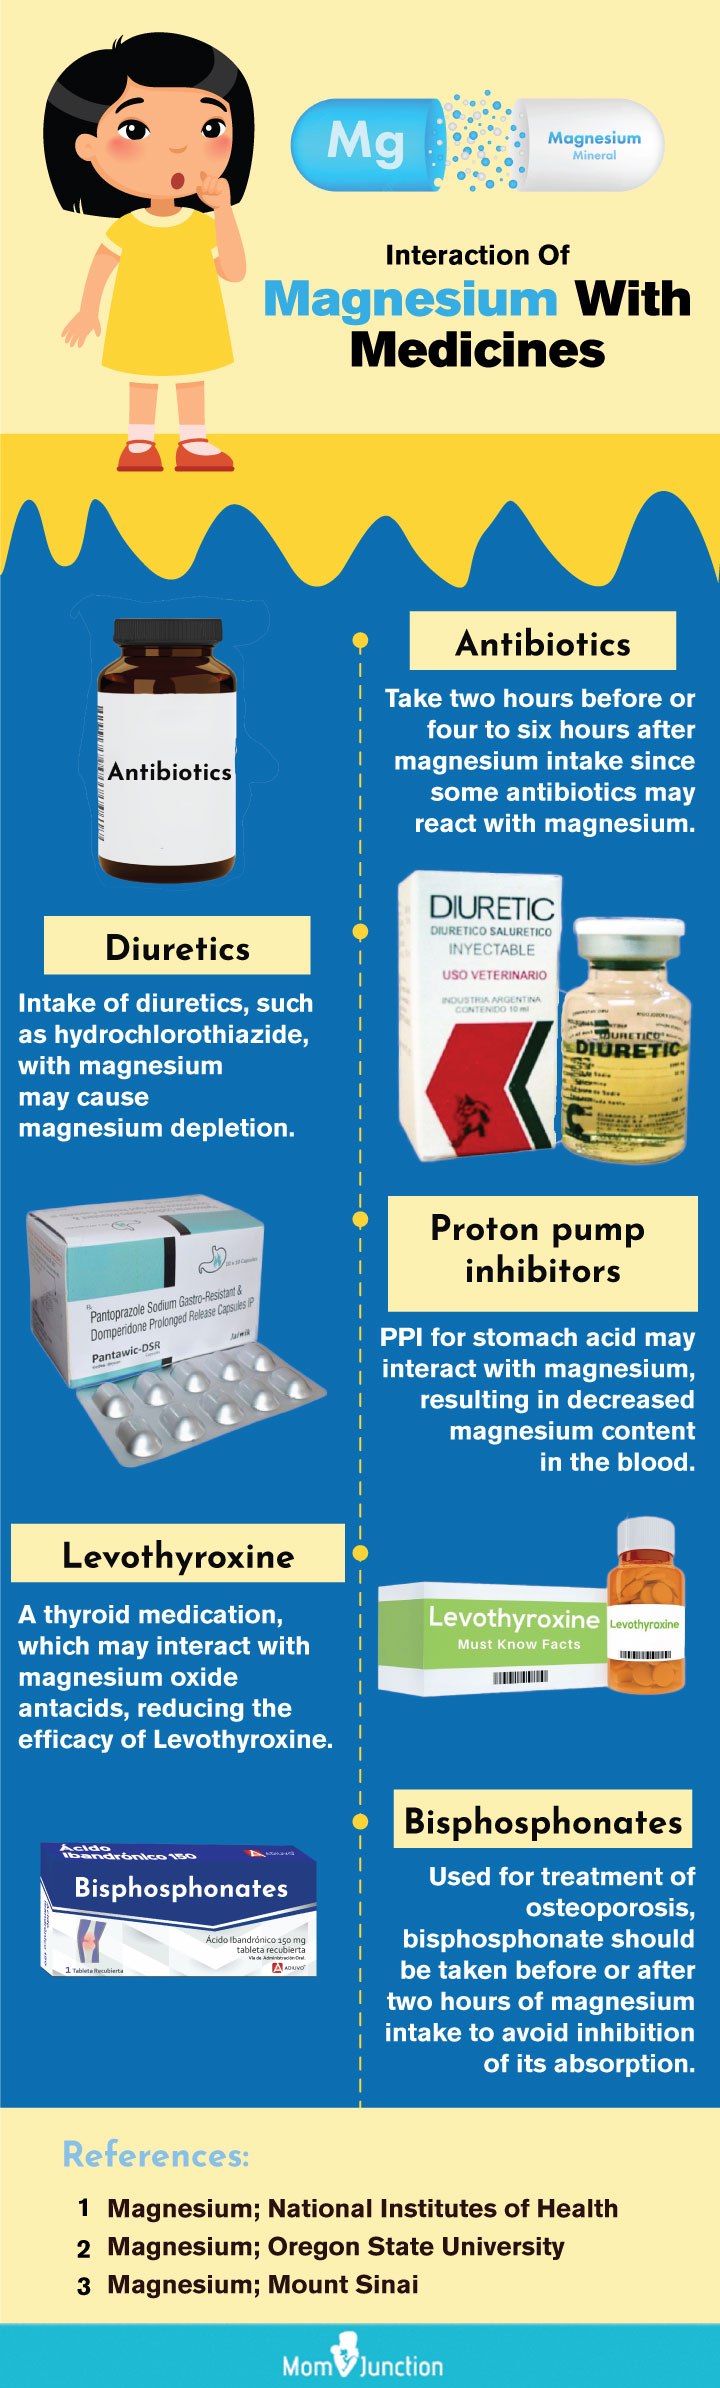 interaction of magnesium with medicines [infographic]